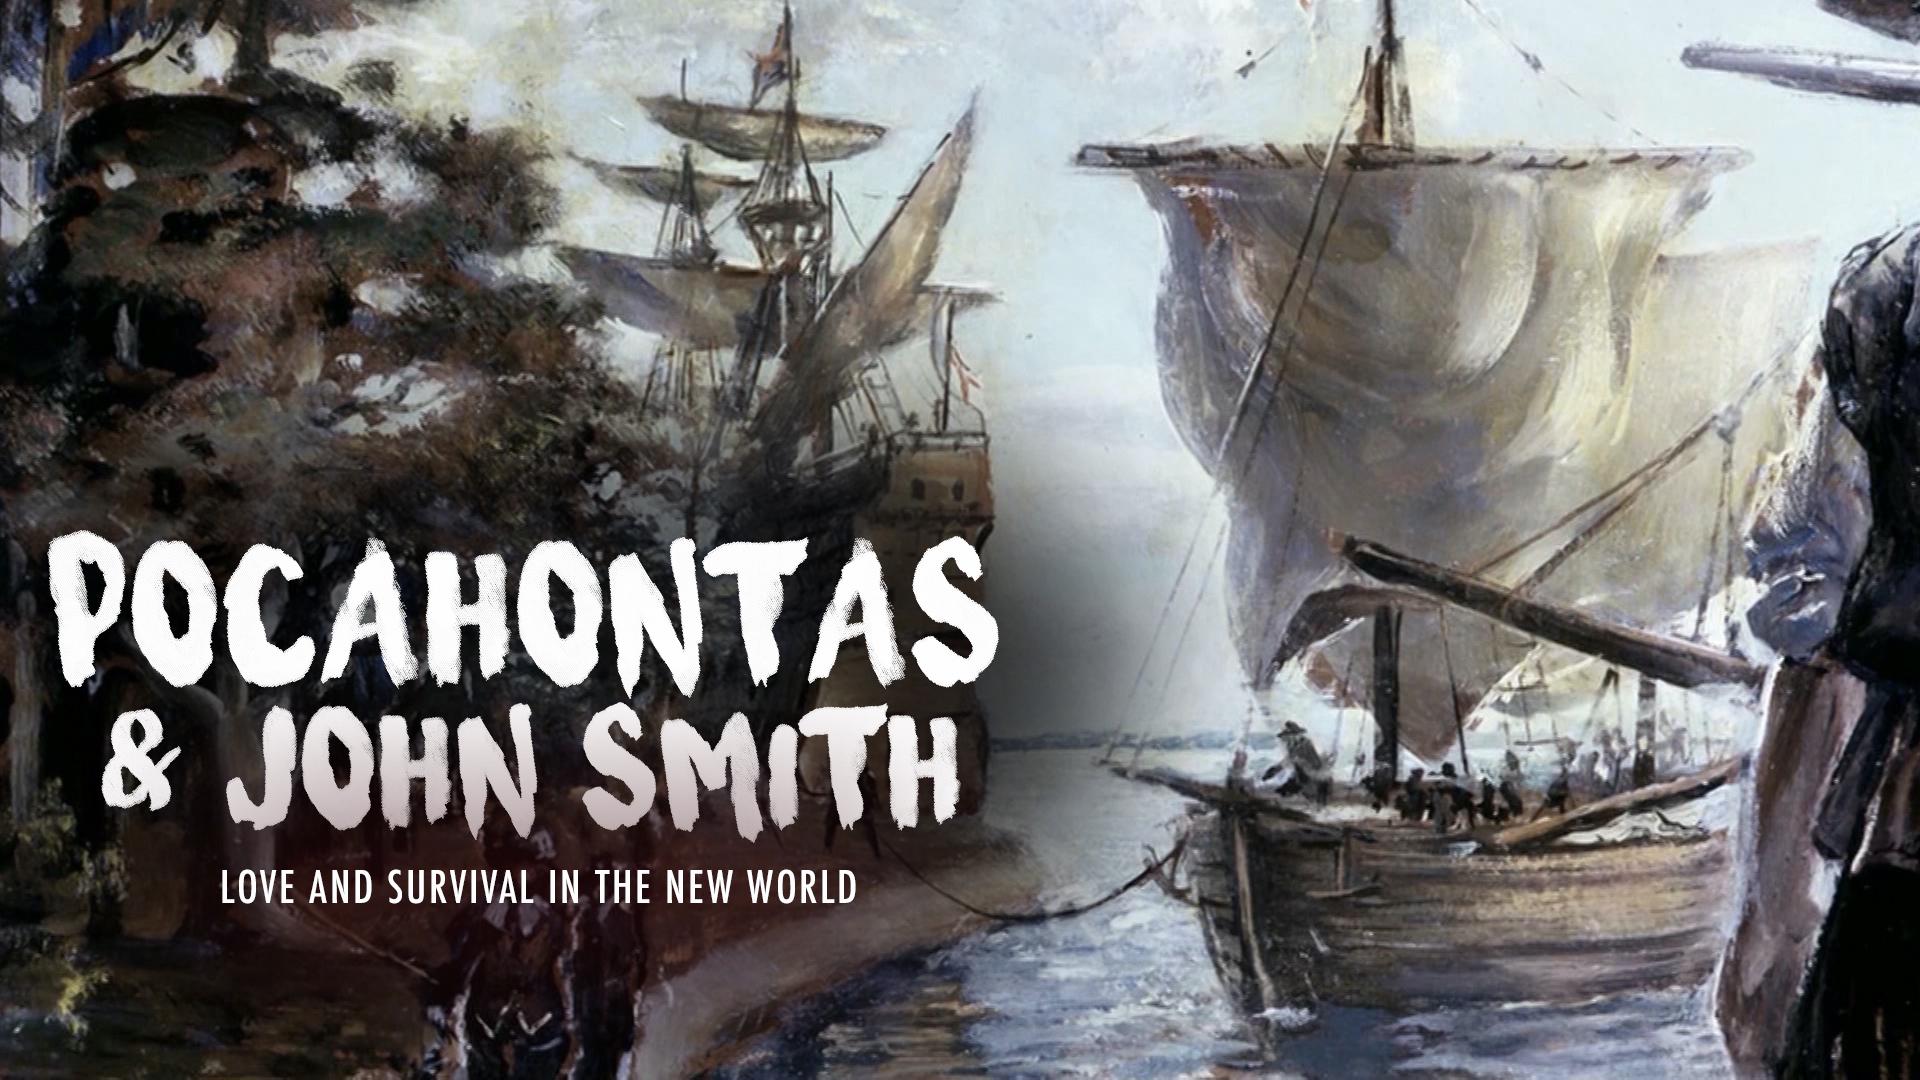 Pocahontas & John Smith: Love and Survival in the New World - Trailer